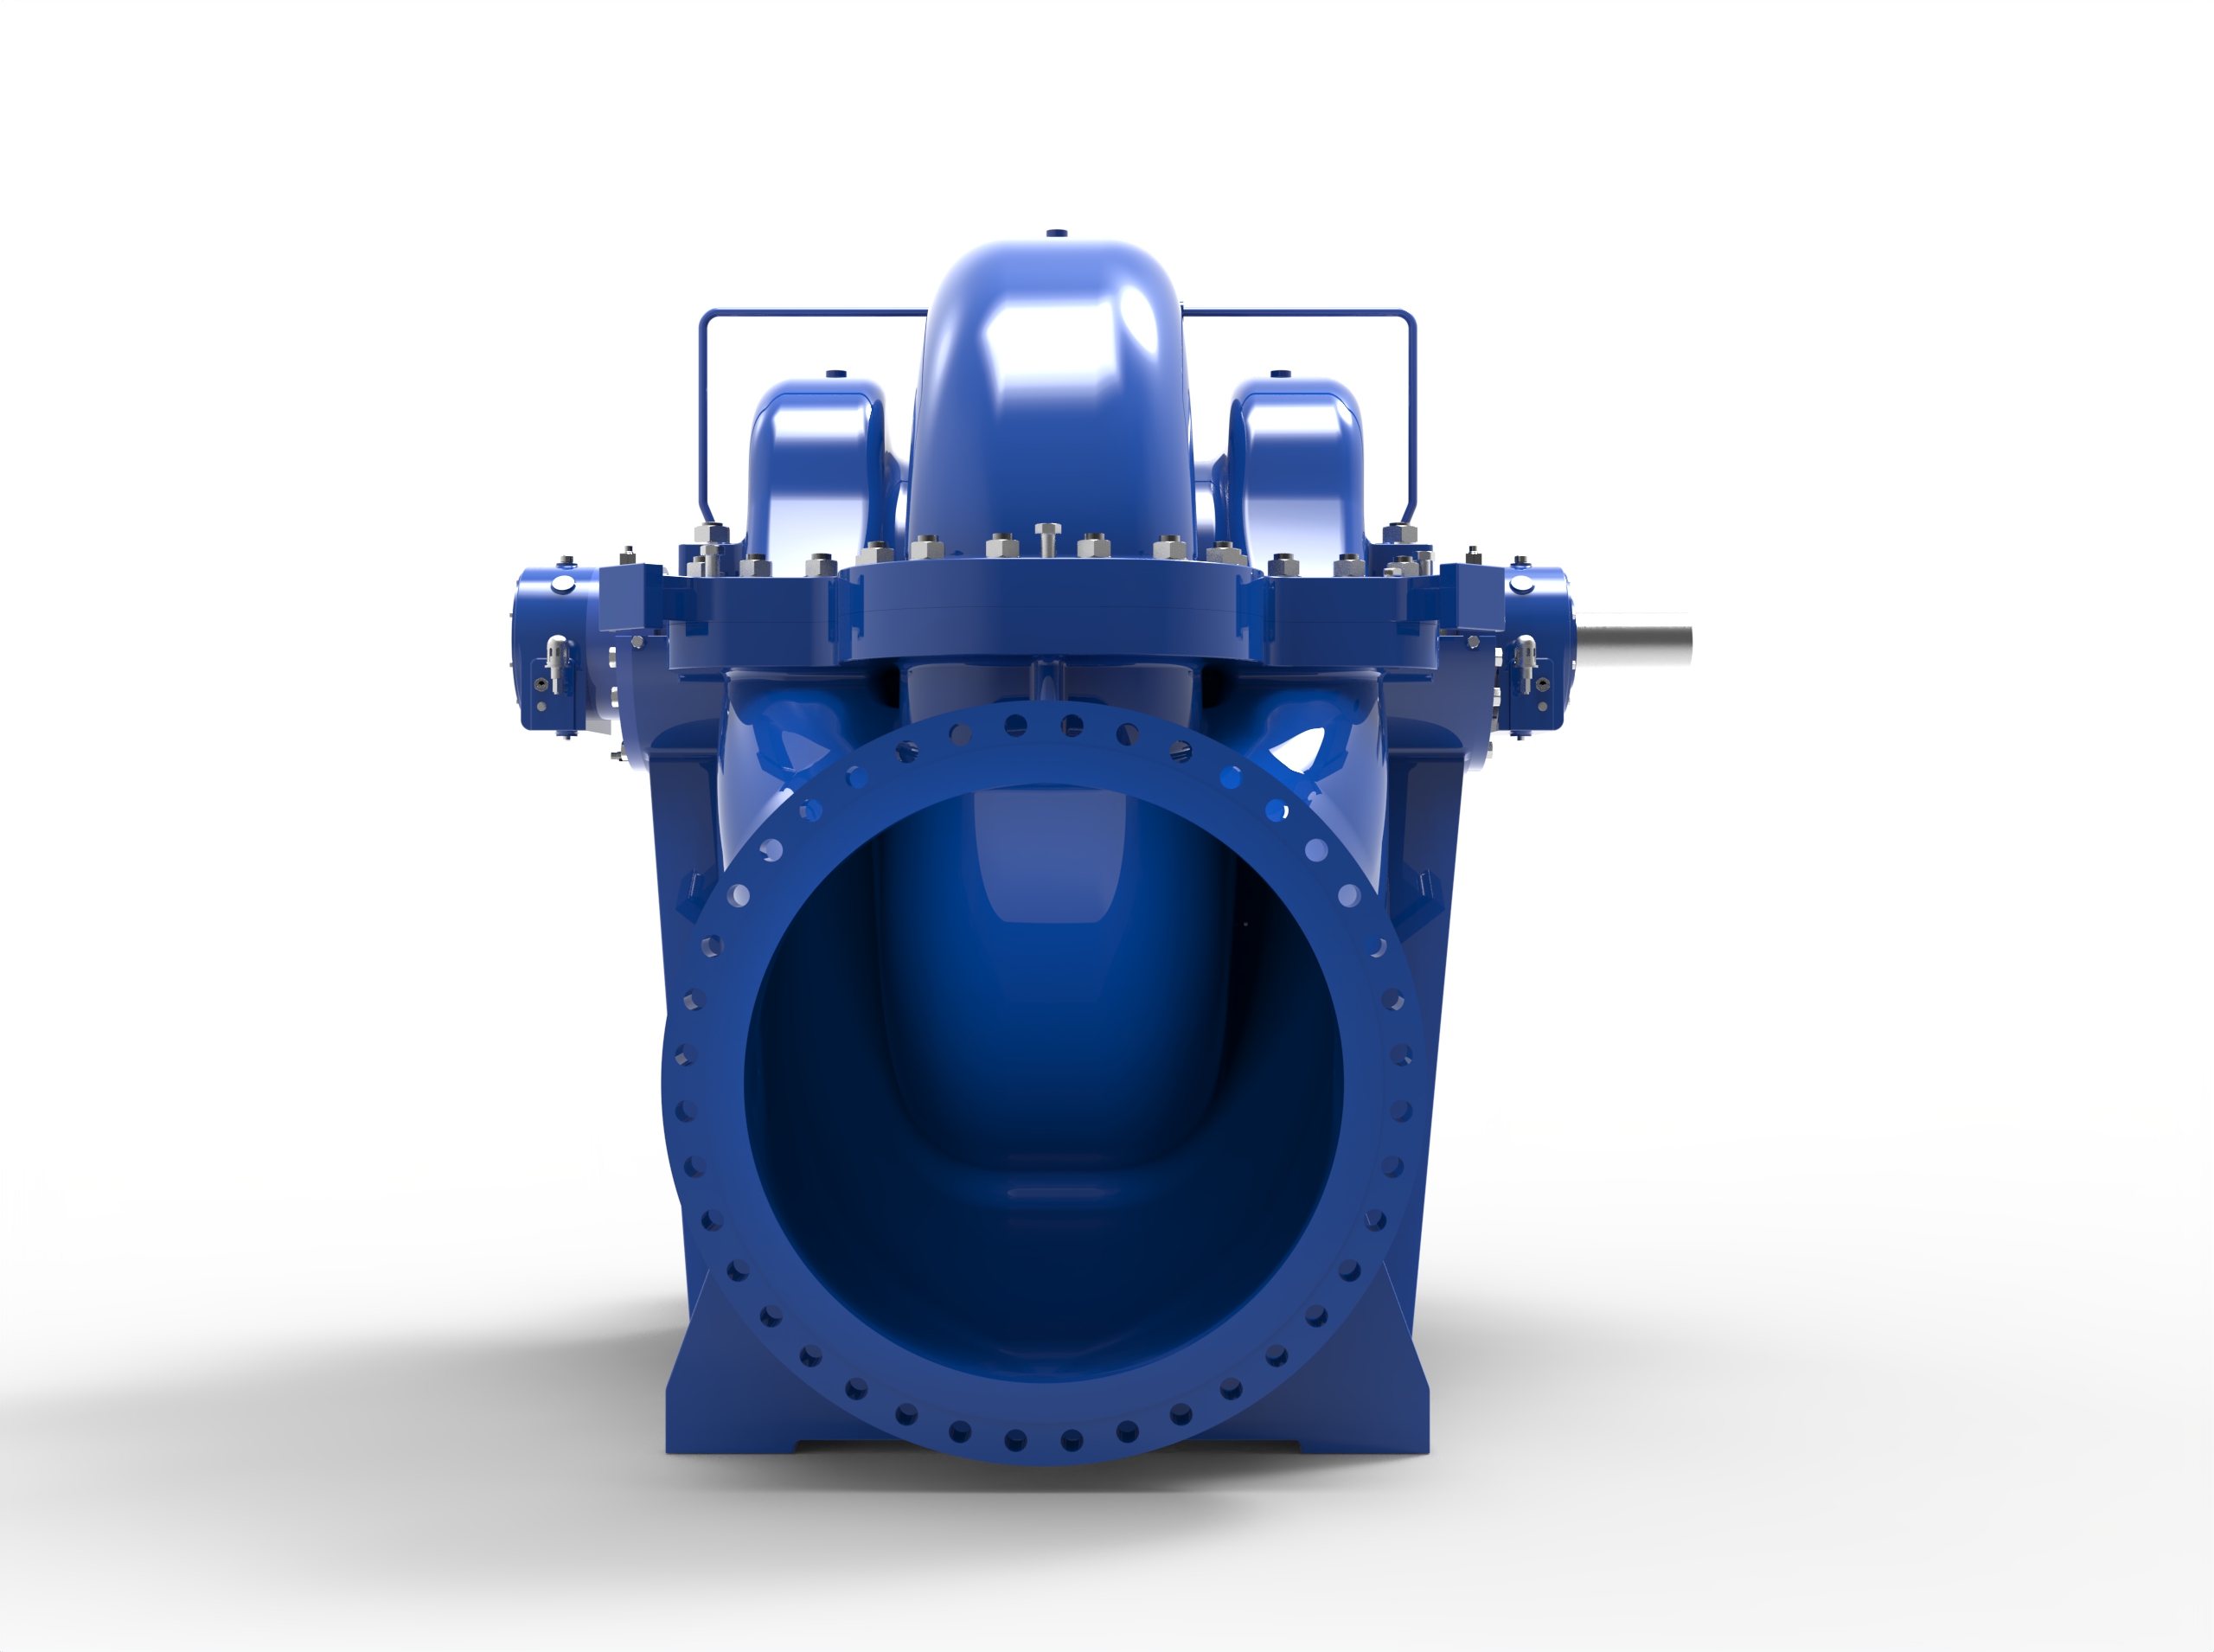 Right side view of a Termomeccanica Pompe DD BB1 TYPE API 610 Centrifugal Pump manufactured by Trillium Flow Technologies